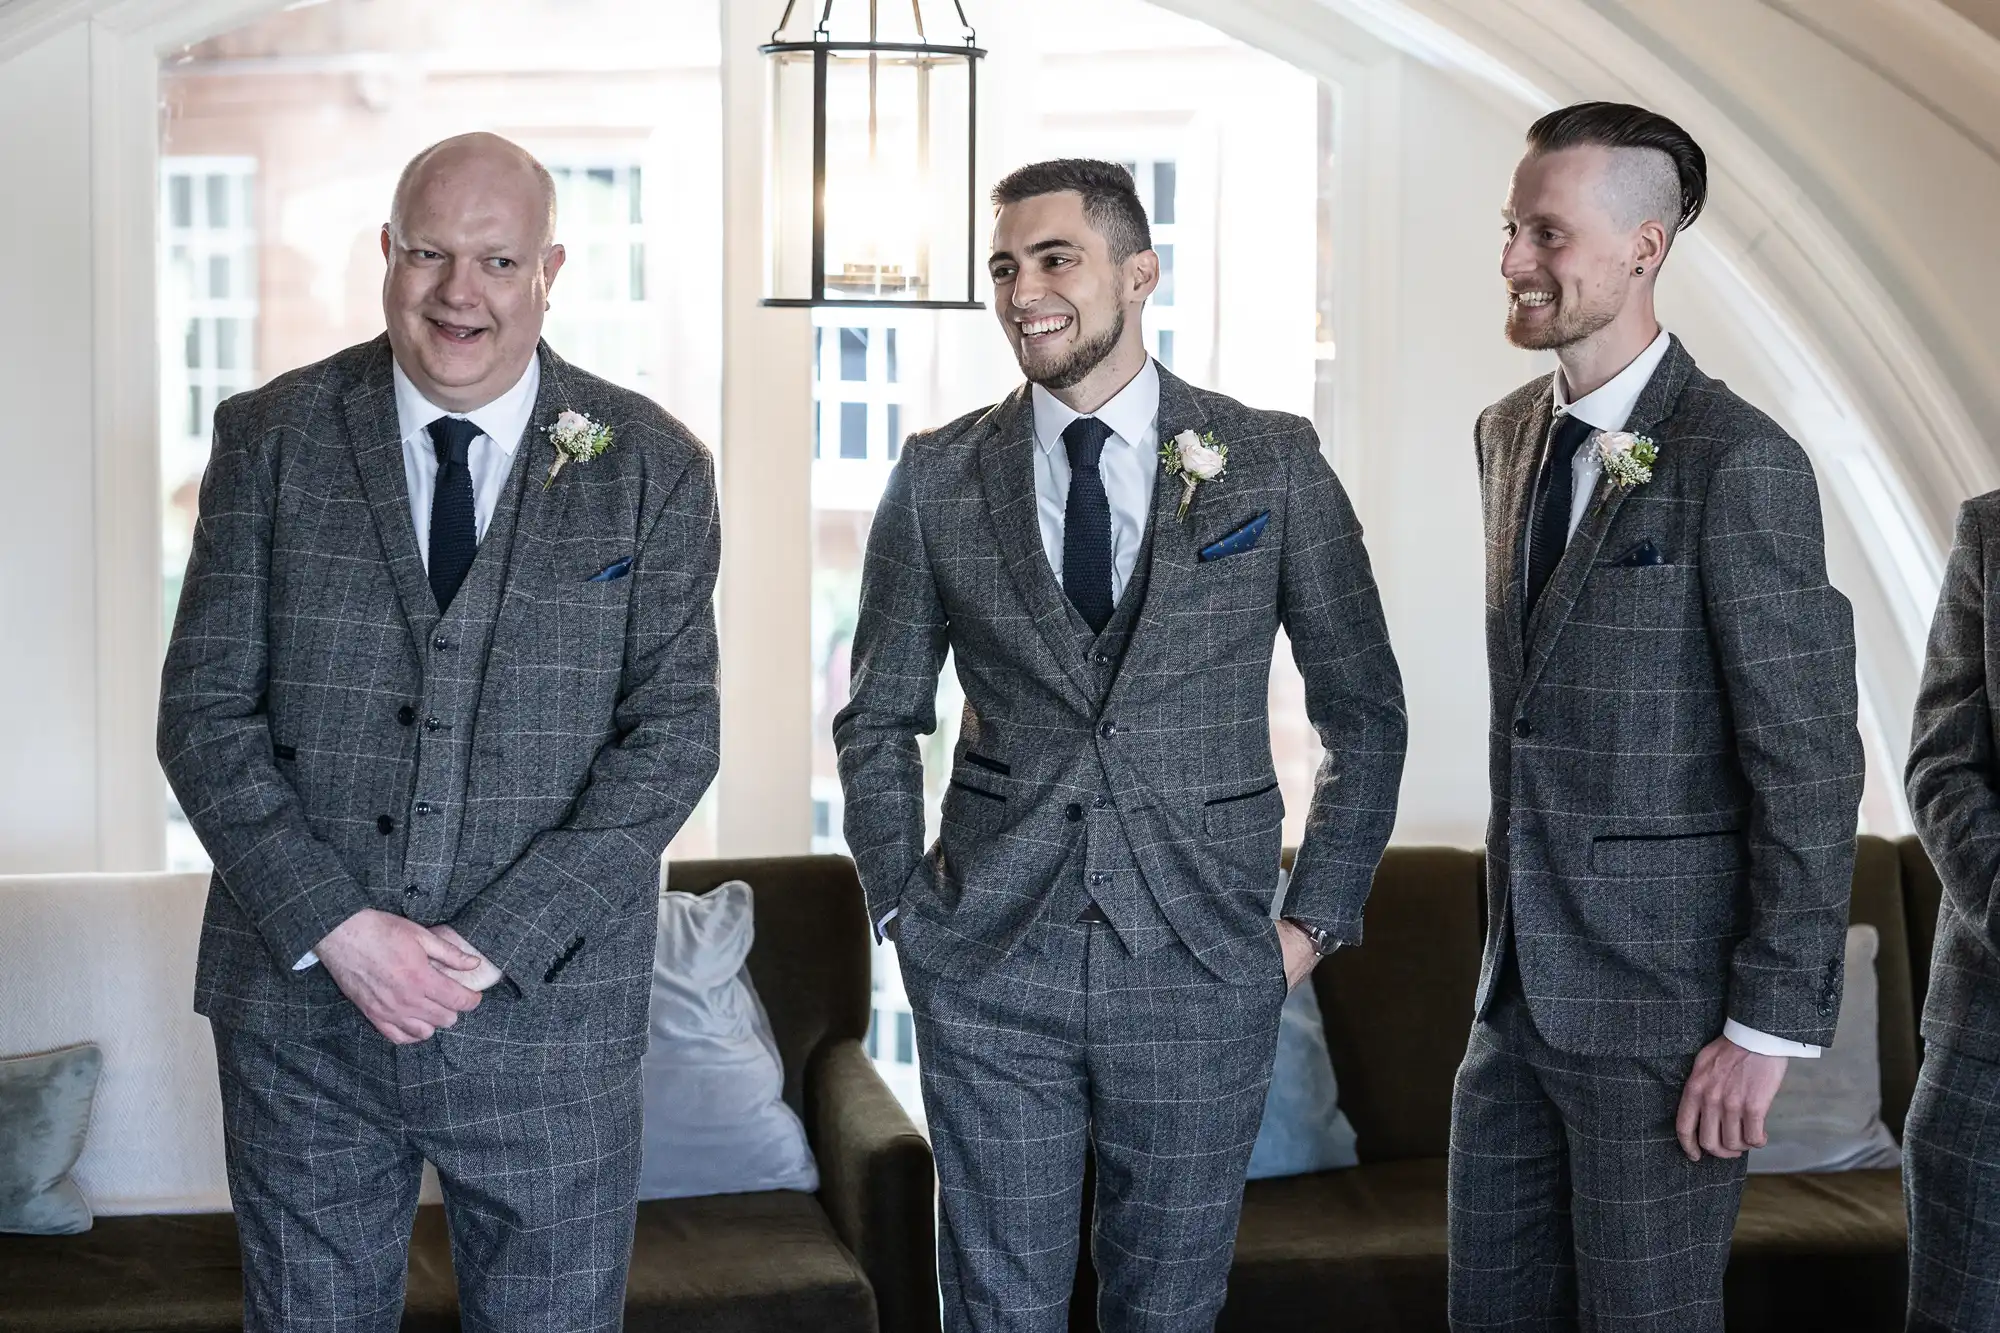 Three smiling men in matching gray suits and boutonnieres standing in a bright, elegant room.